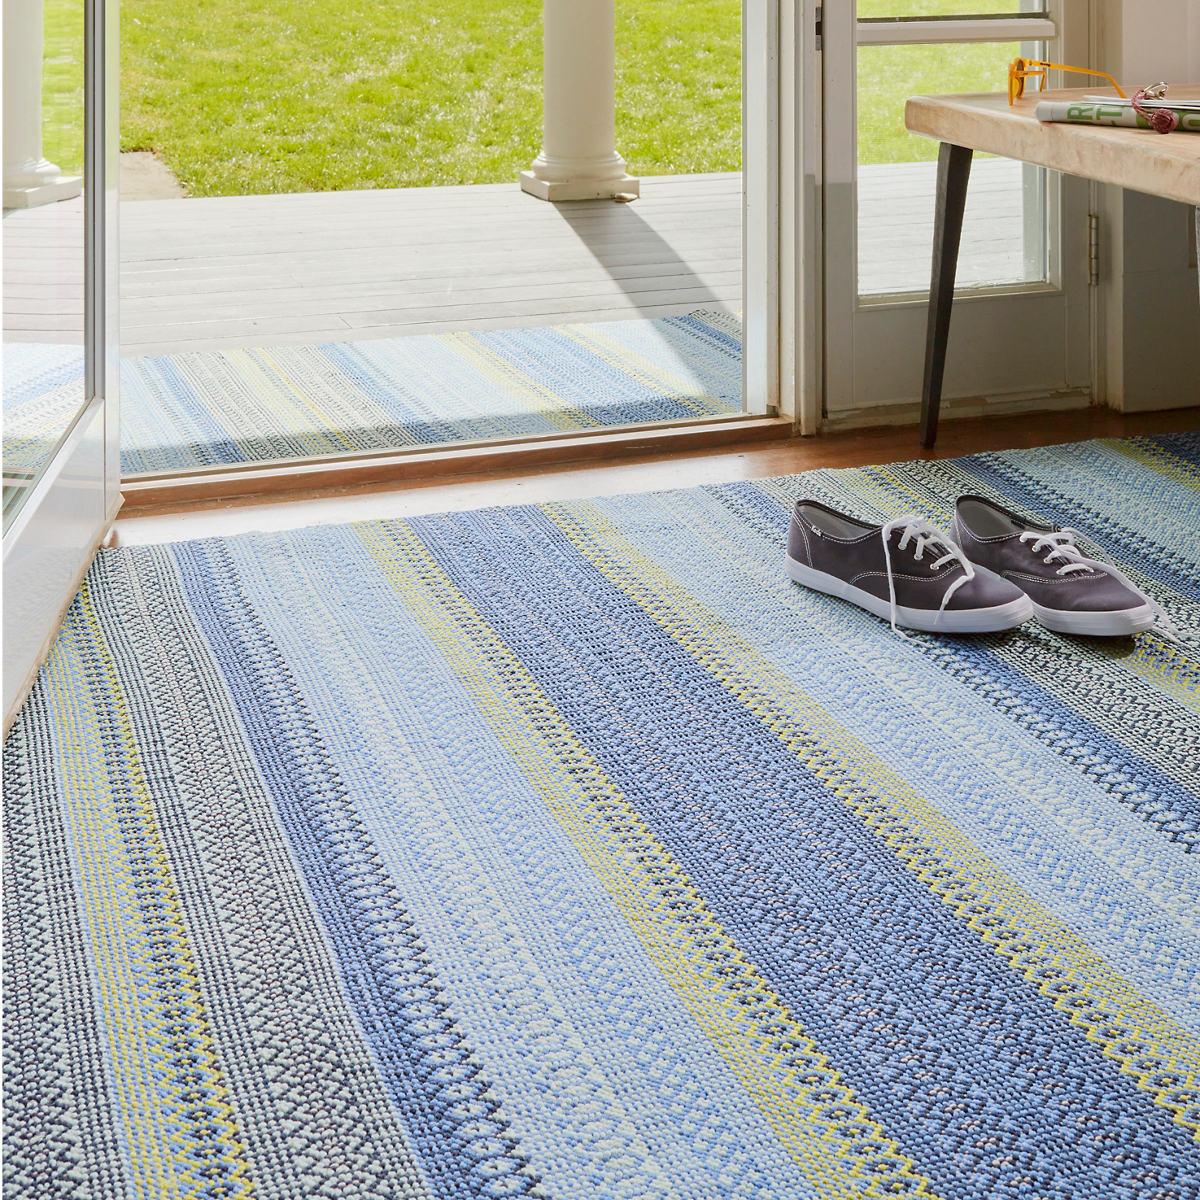 Blue Green Indoor Outdoor Rug Dash, Navy Blue And Lime Green Outdoor Rug